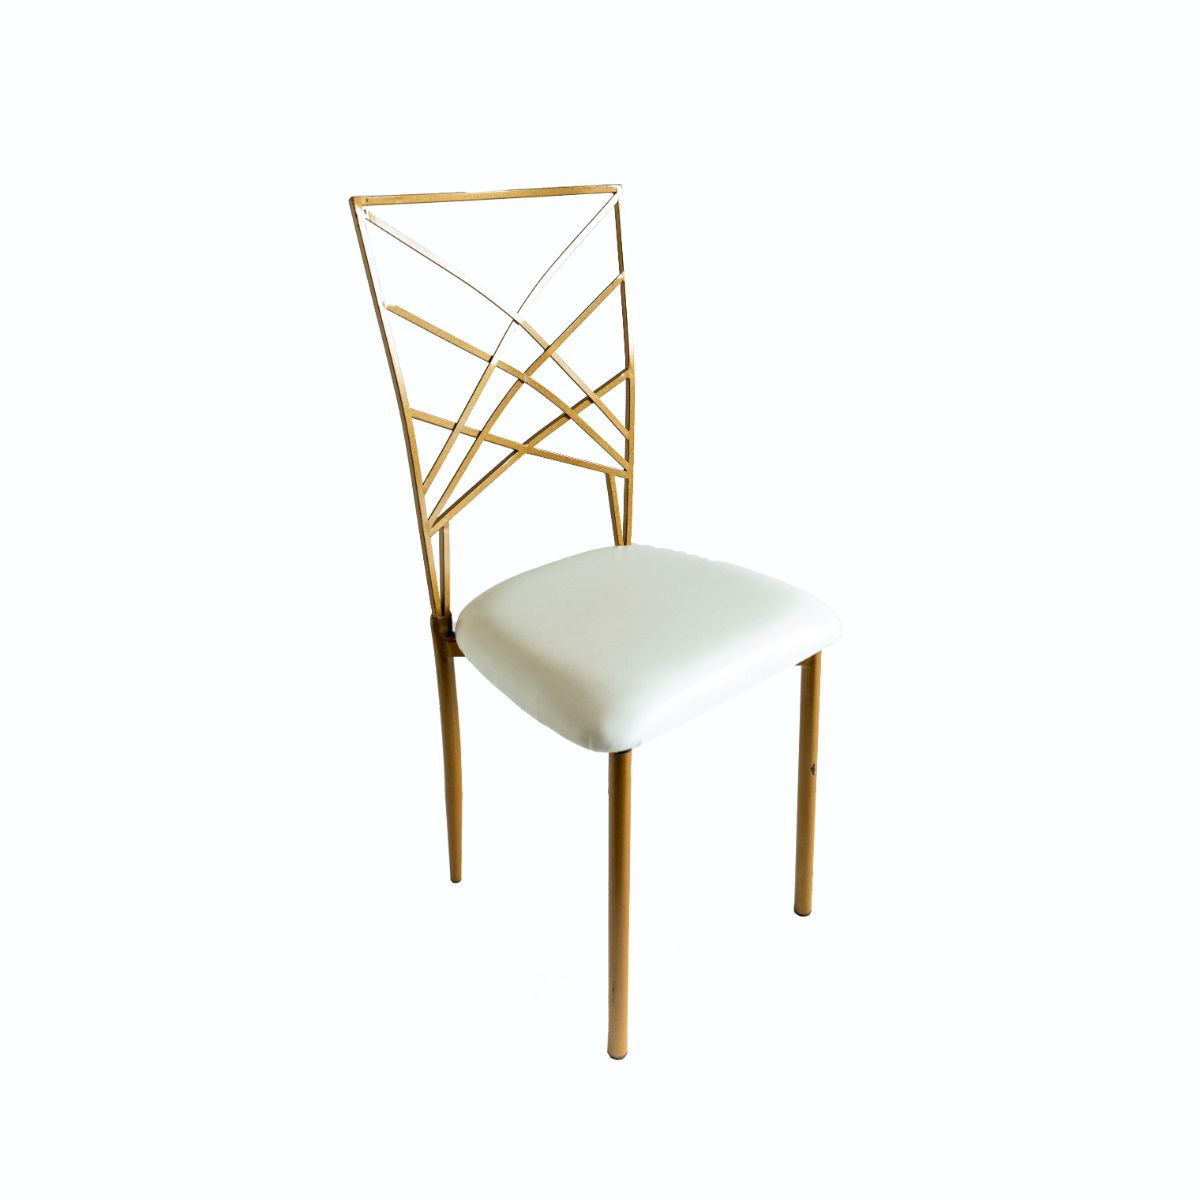  Gold Chameleon Chair with White Cushion 